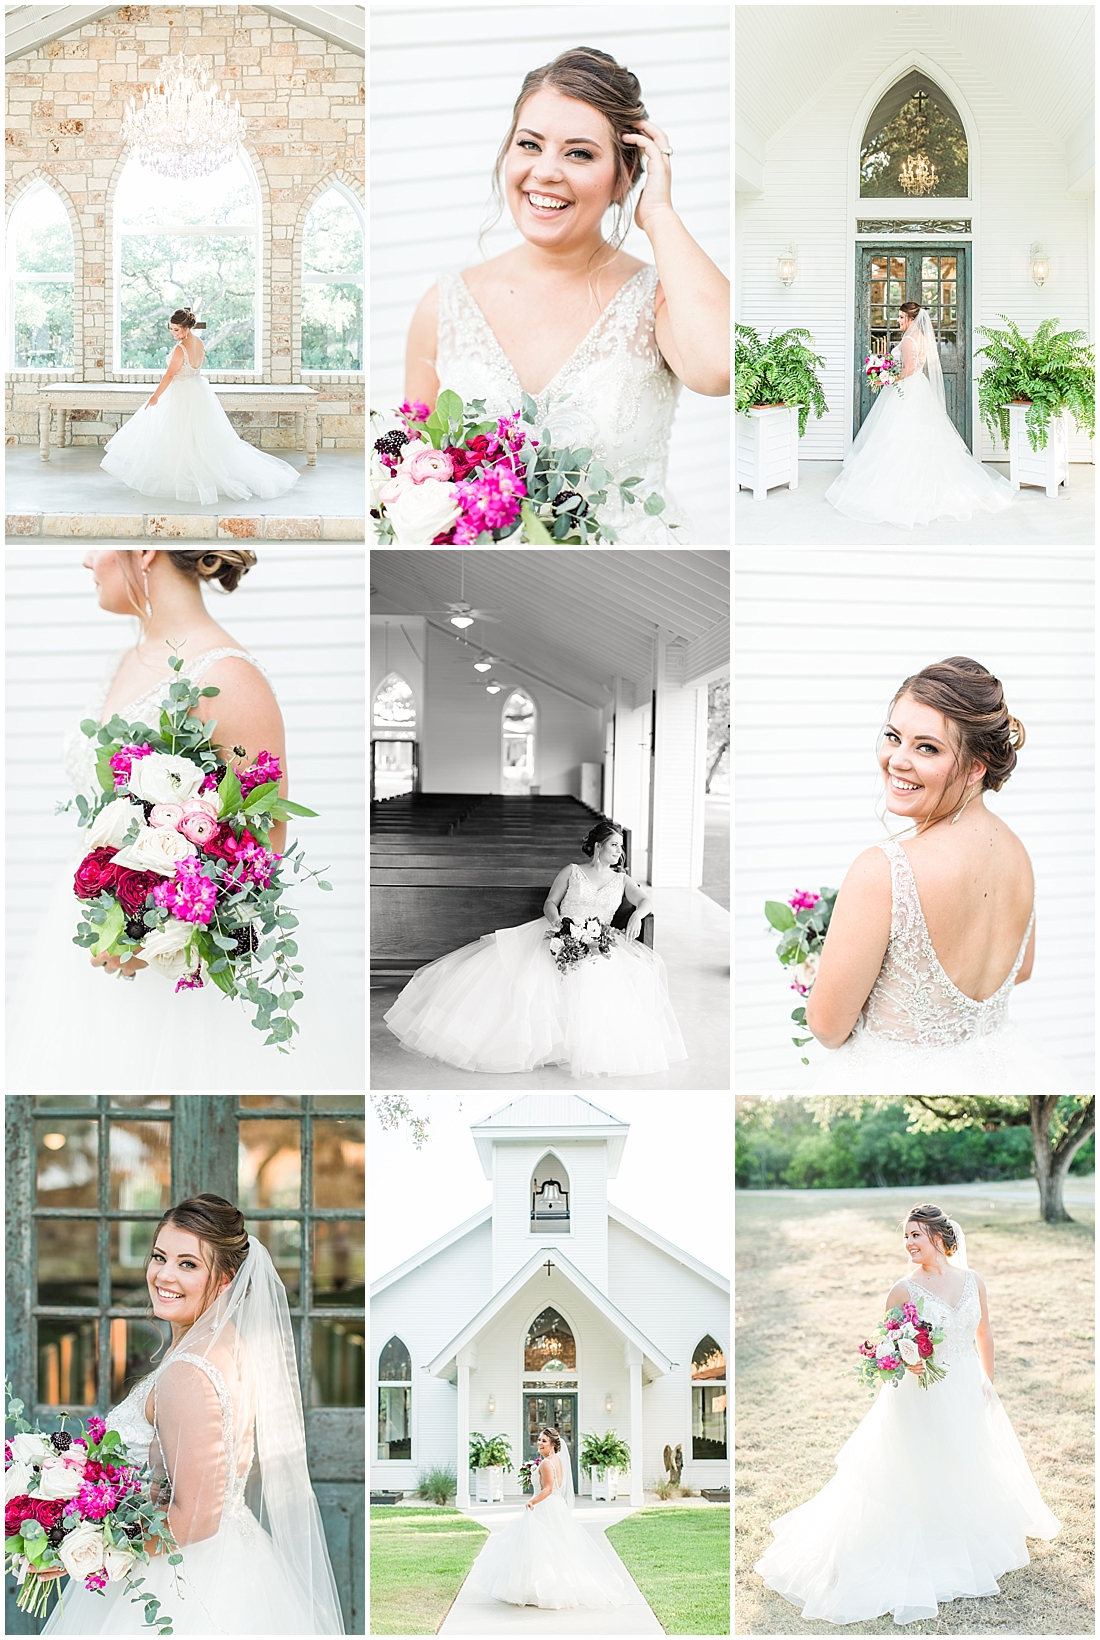 Summer Bridal Session at The Chandelier of Gruene in New Braunfels Texas 0001 1